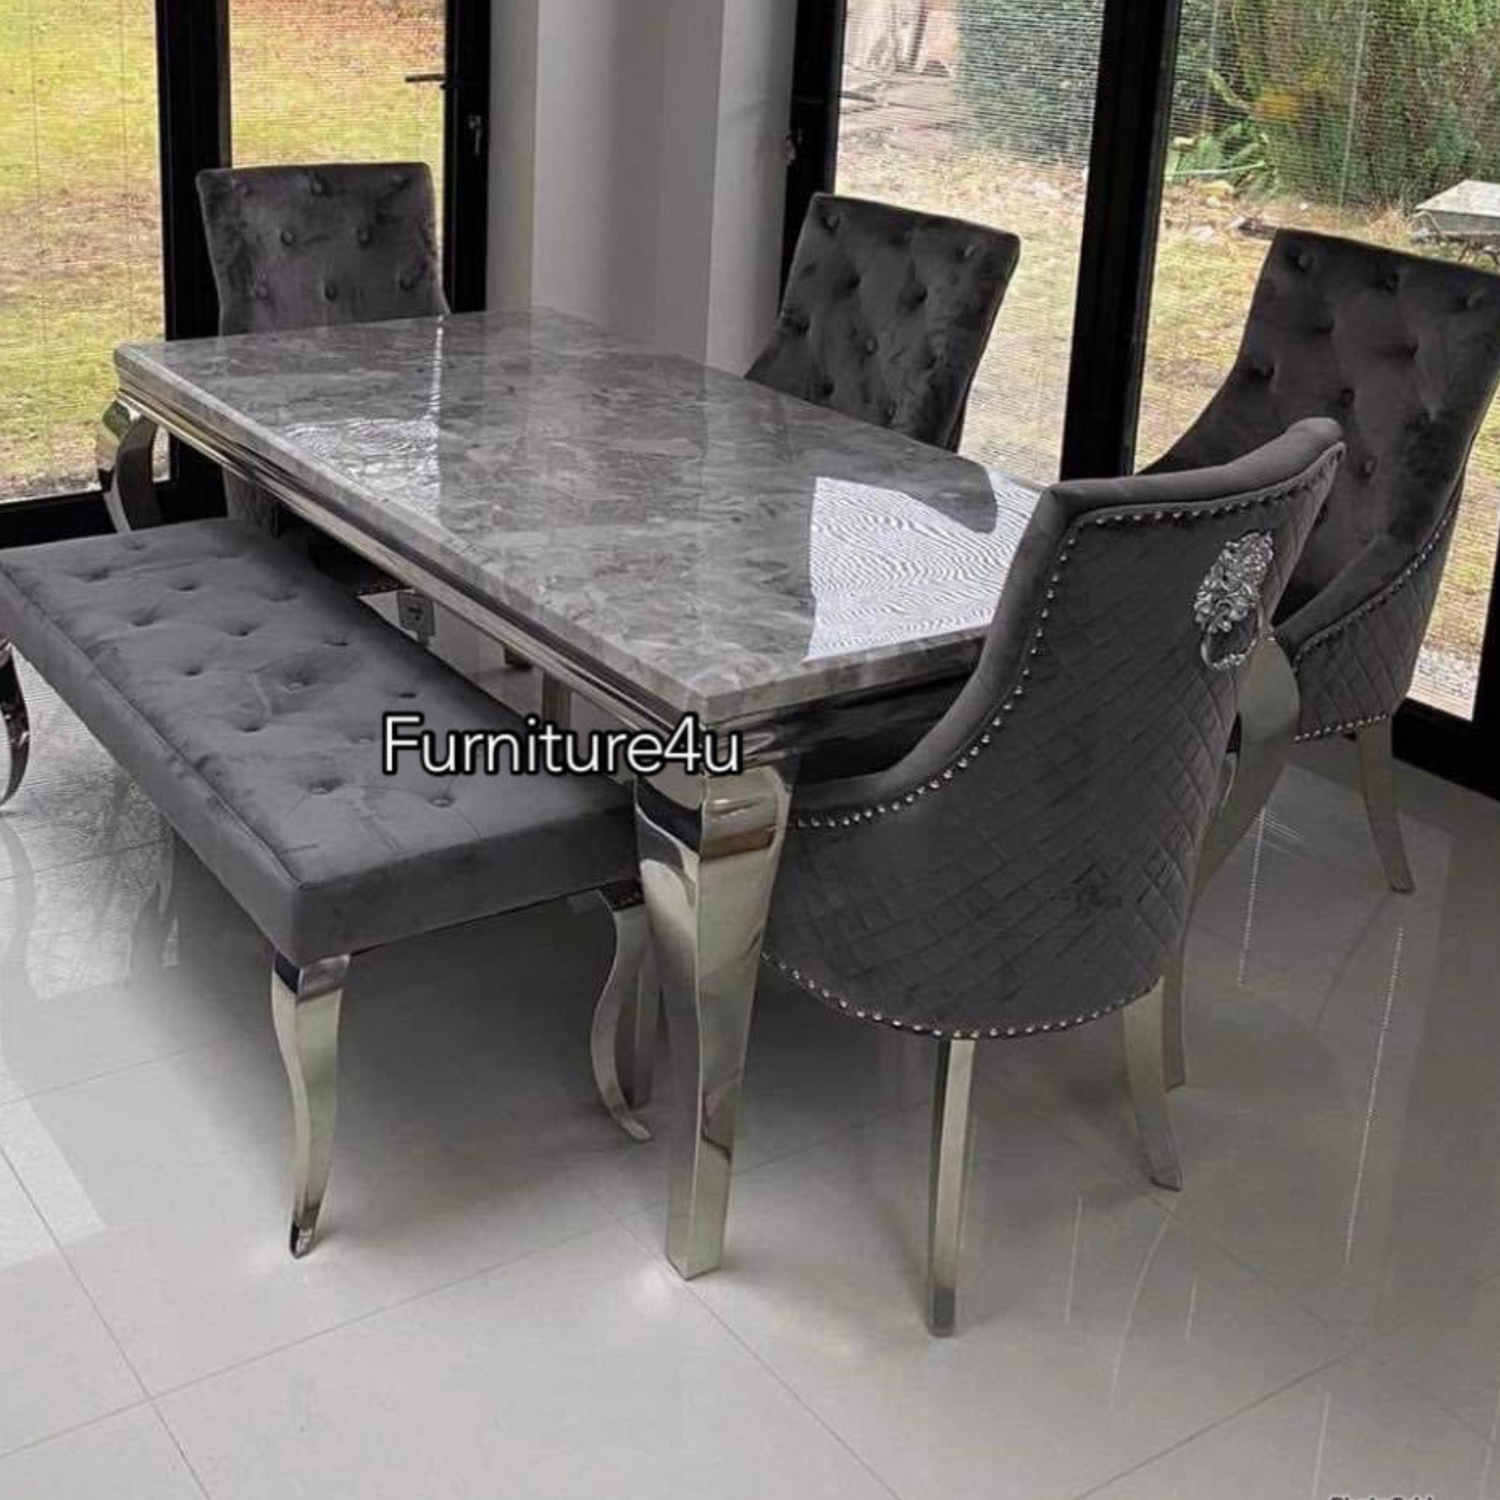 1.5 Grey Louis with 4 chairs Matching Bench - Mirror4you